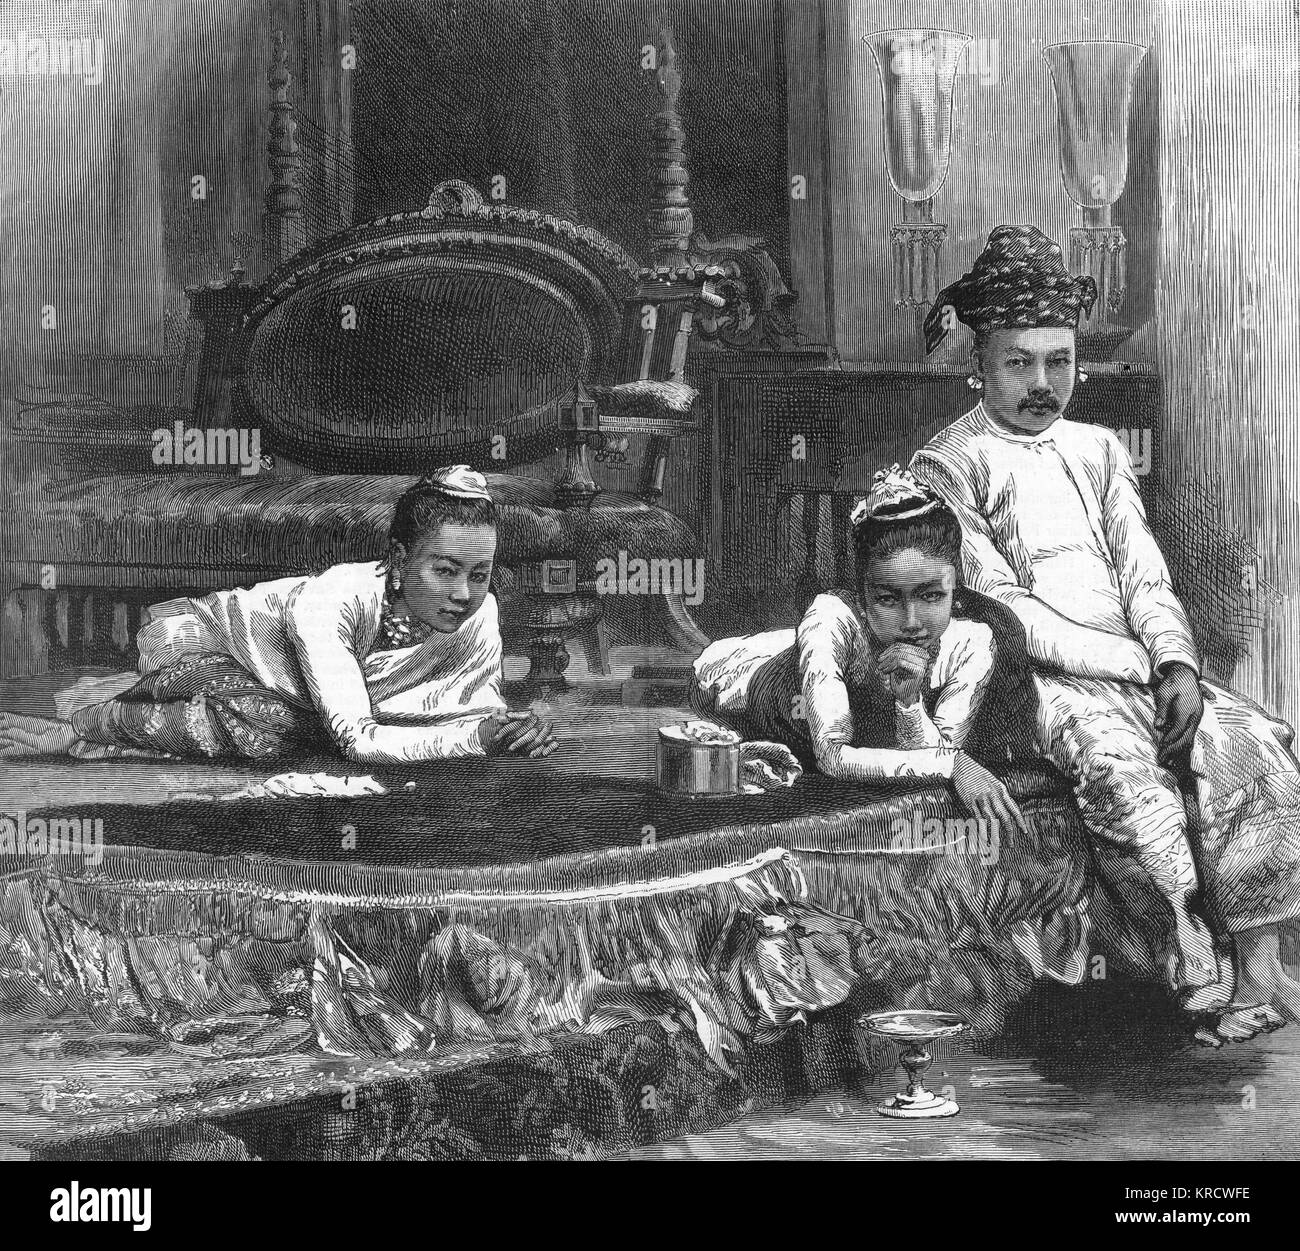 THEEBAW (THIBAW) King Theebaw of Burma with his 'evil' Queen Supayalat (centre) and her sister. Defeated in third Burmese War. Date: 1858 - 1916 Stock Photo